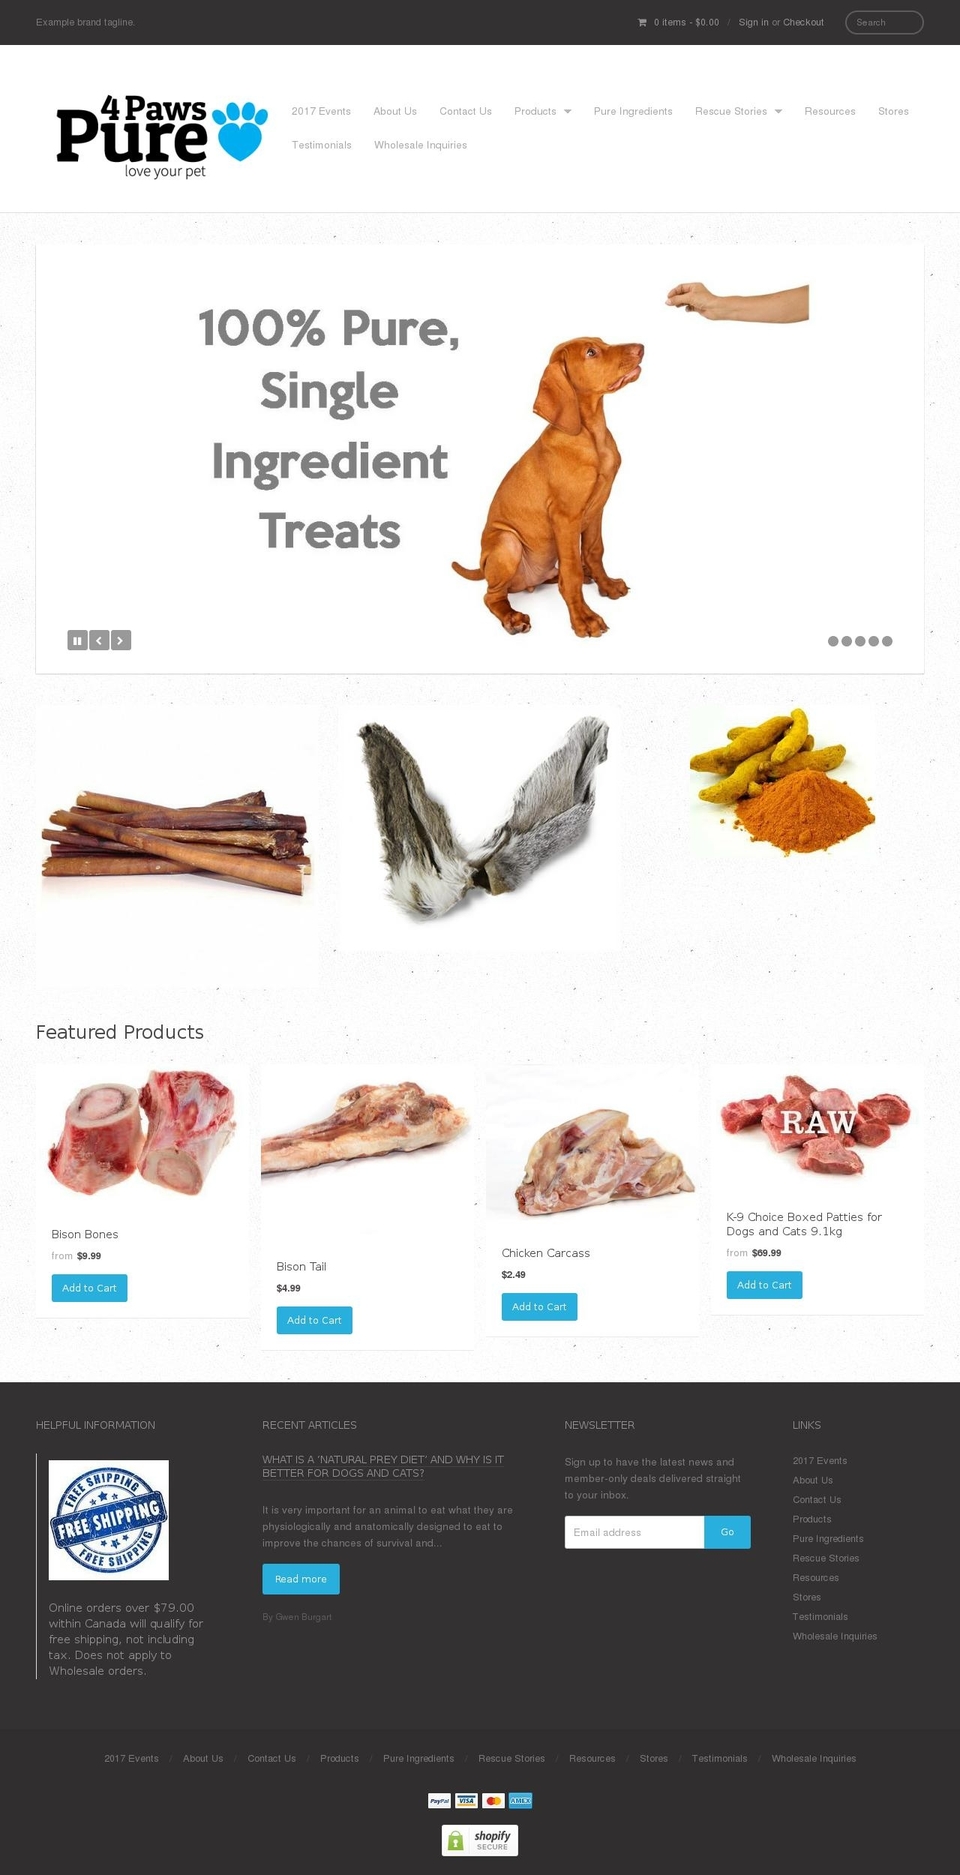 Providence Shopify theme site example 4pawspure.ca